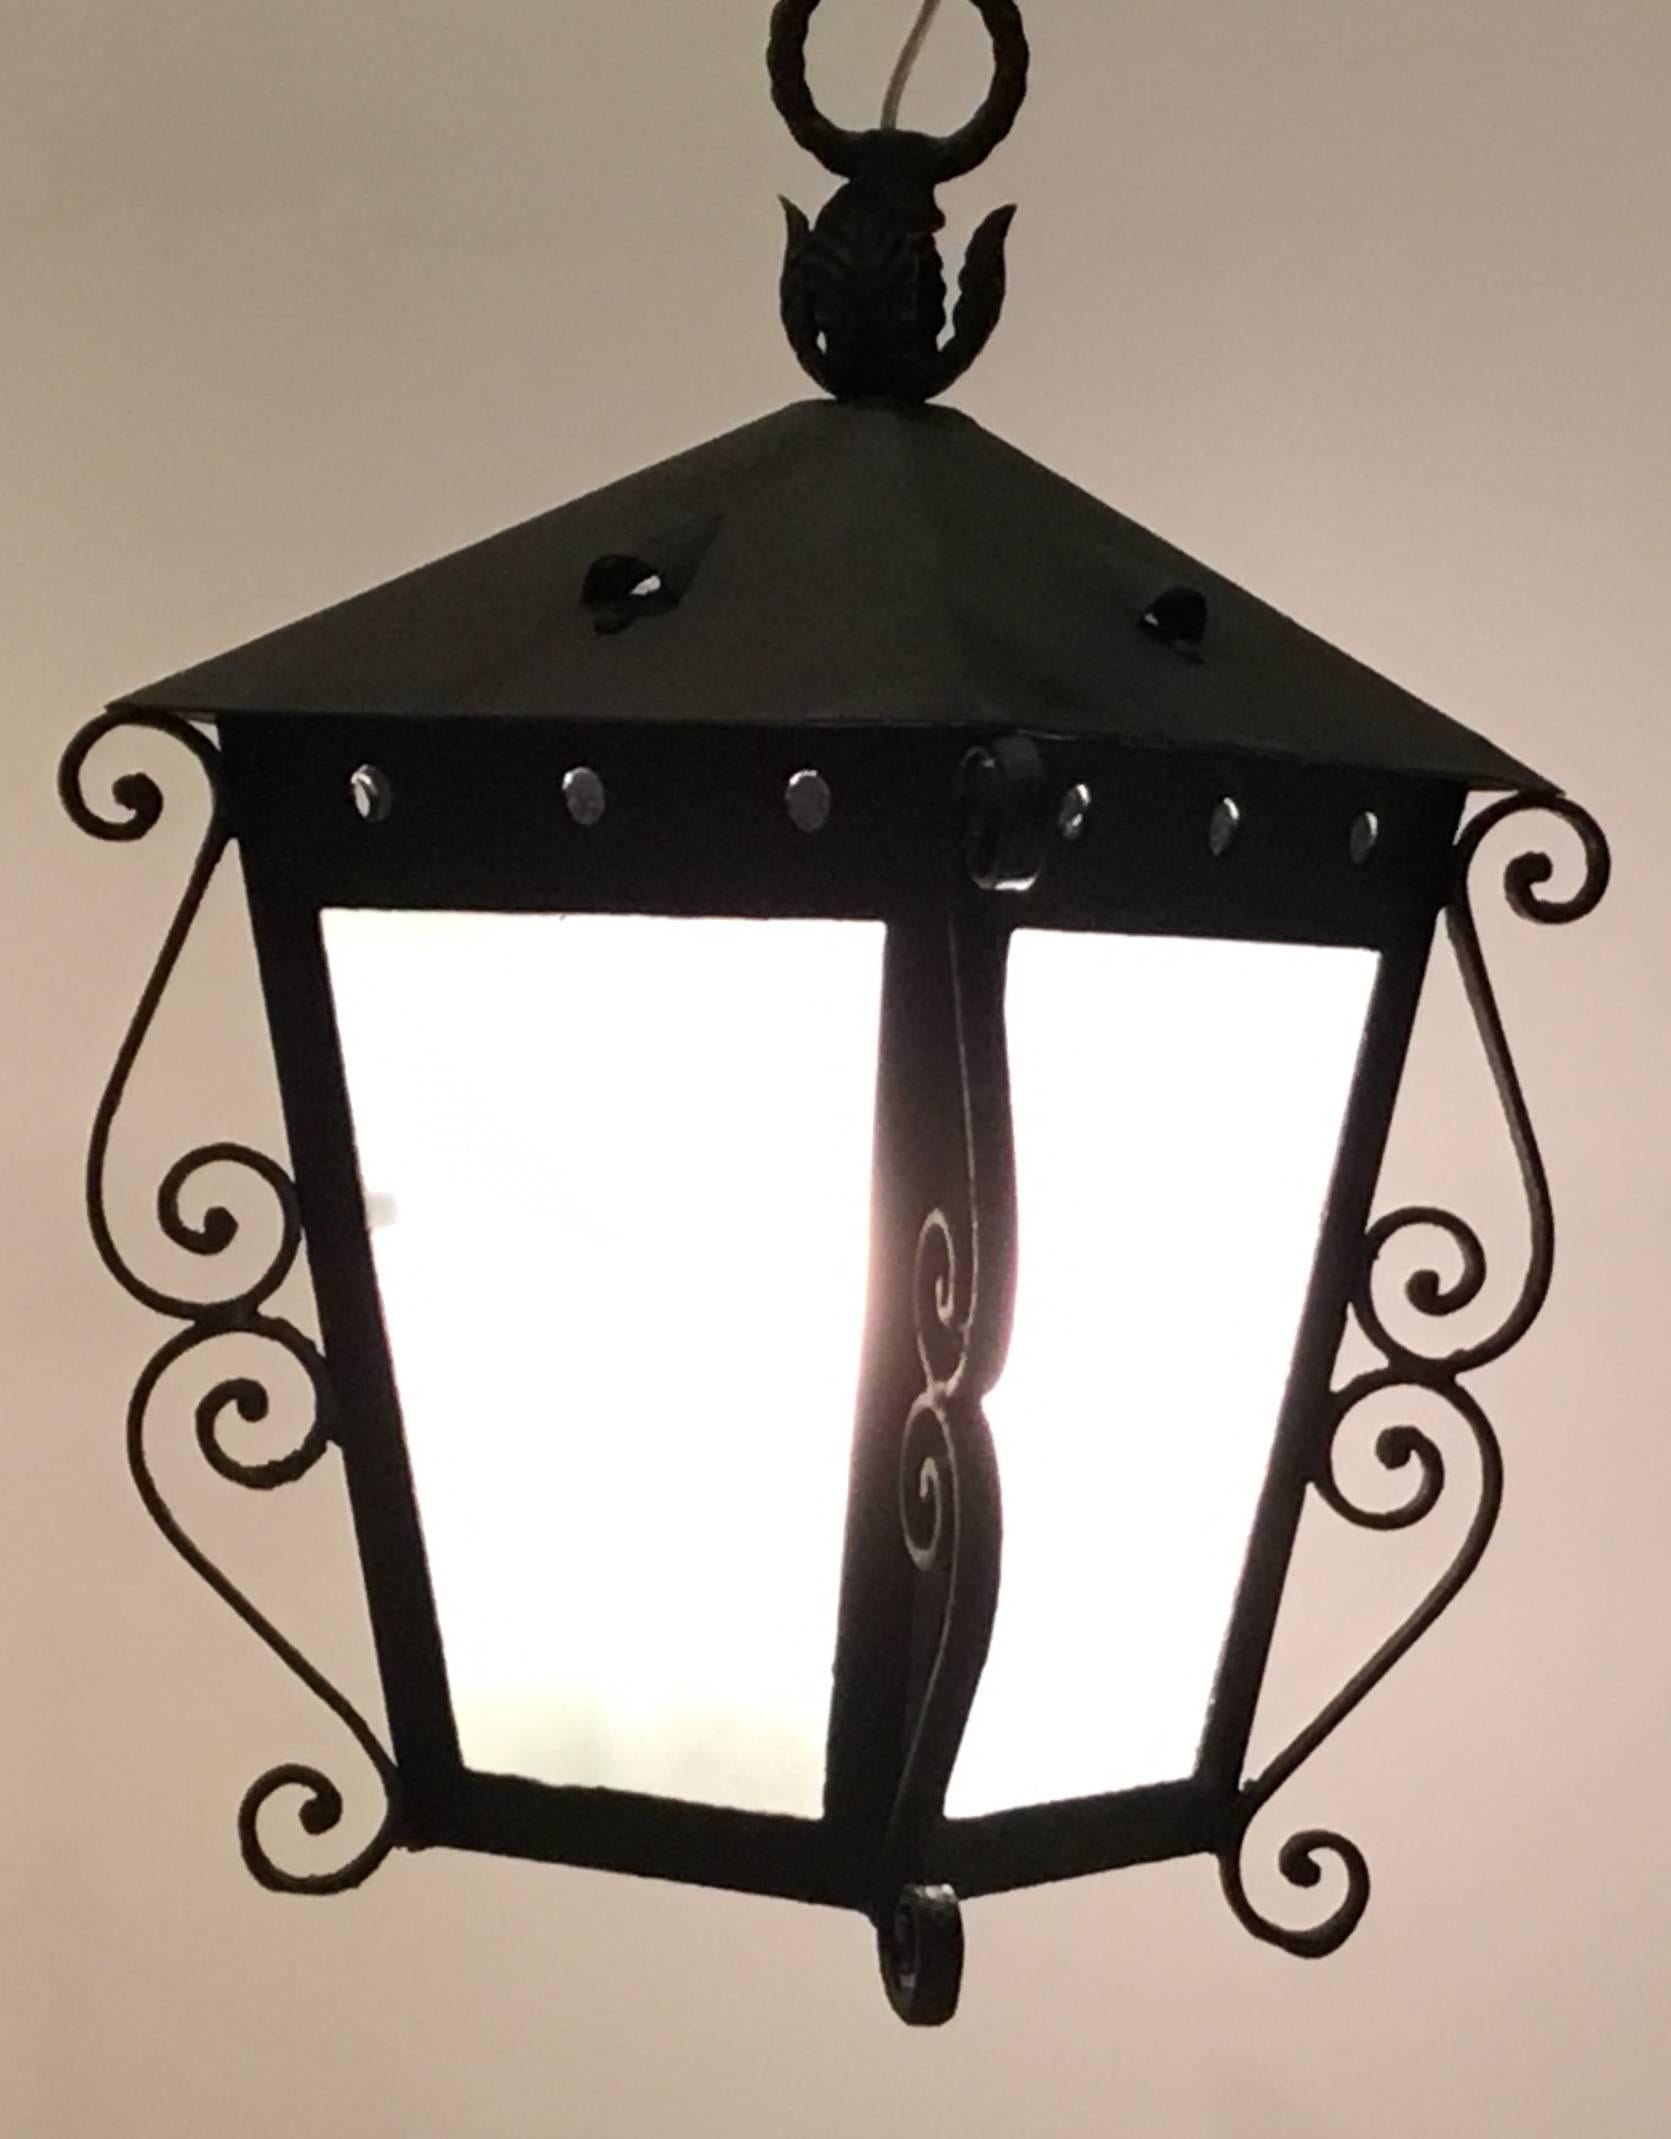 Vintage Hanging lantern made of forged iron in the Architectural style of palm beach Mizner,
Milk color glass ,newly electrified with two 60/watt lights ,ready to hang and use.